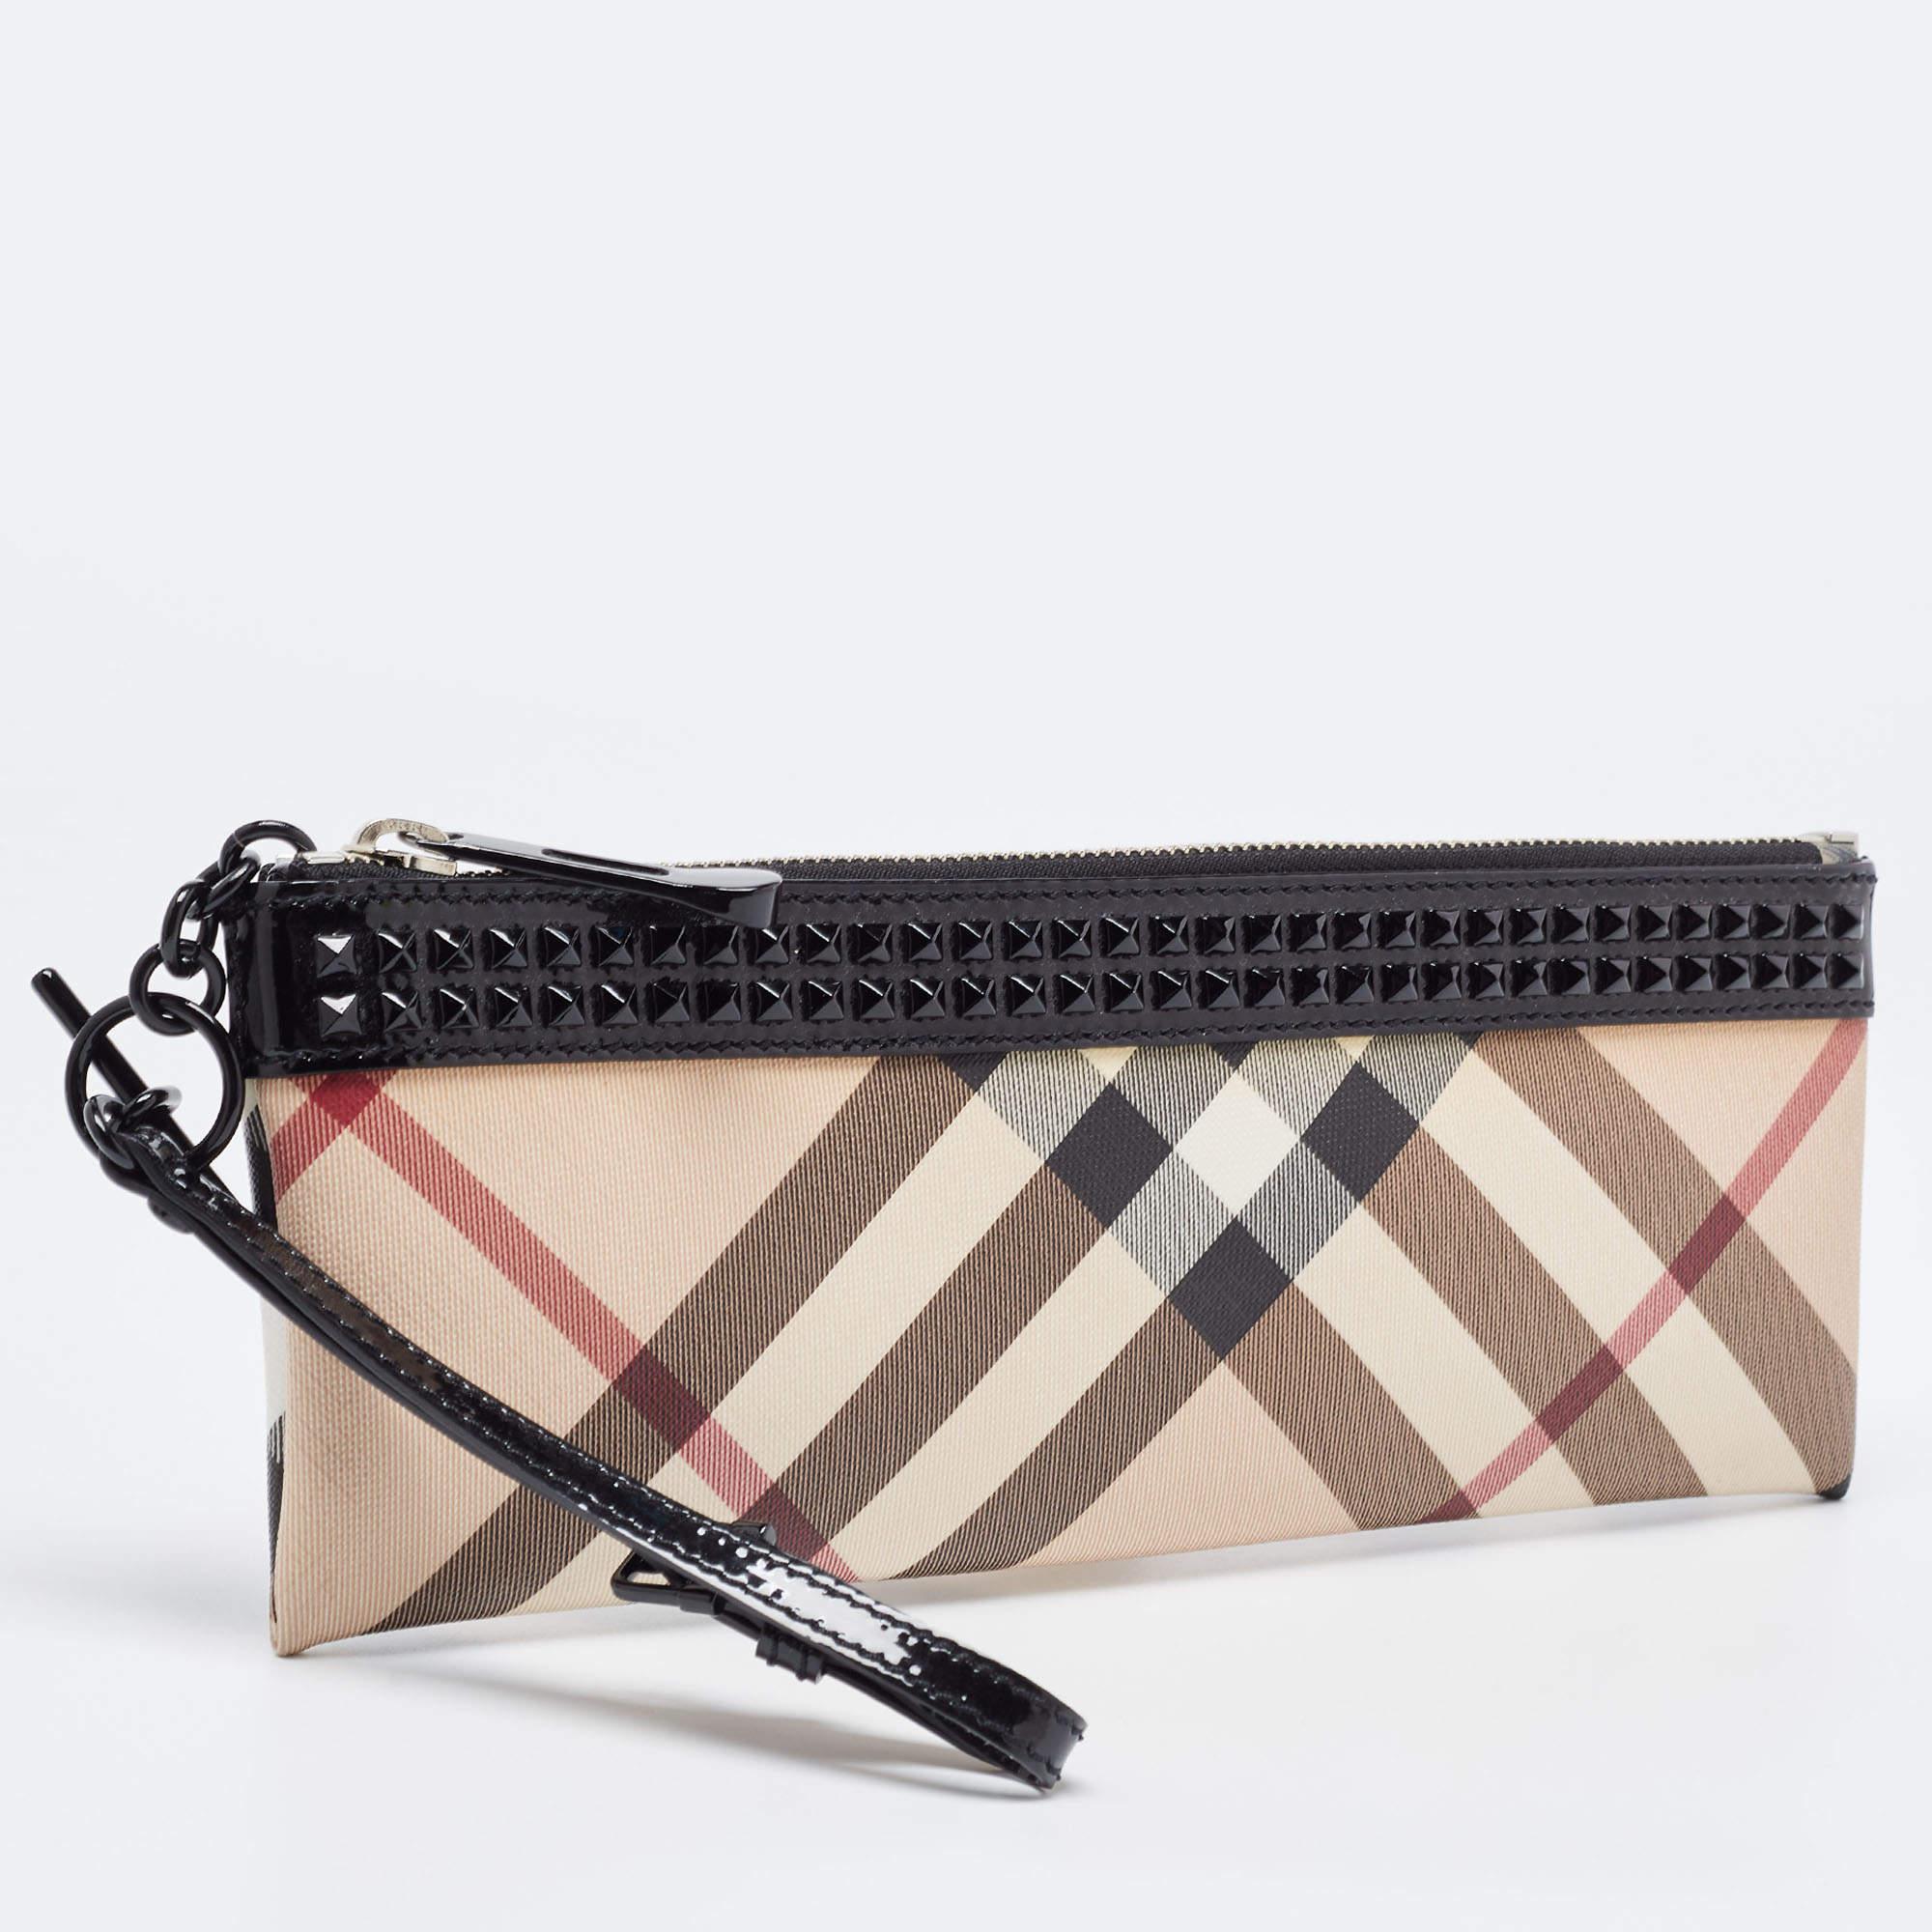 Brown Burberry Beige/Black Nova Check PVC and Patent Leather Studded Wristlet Clutch